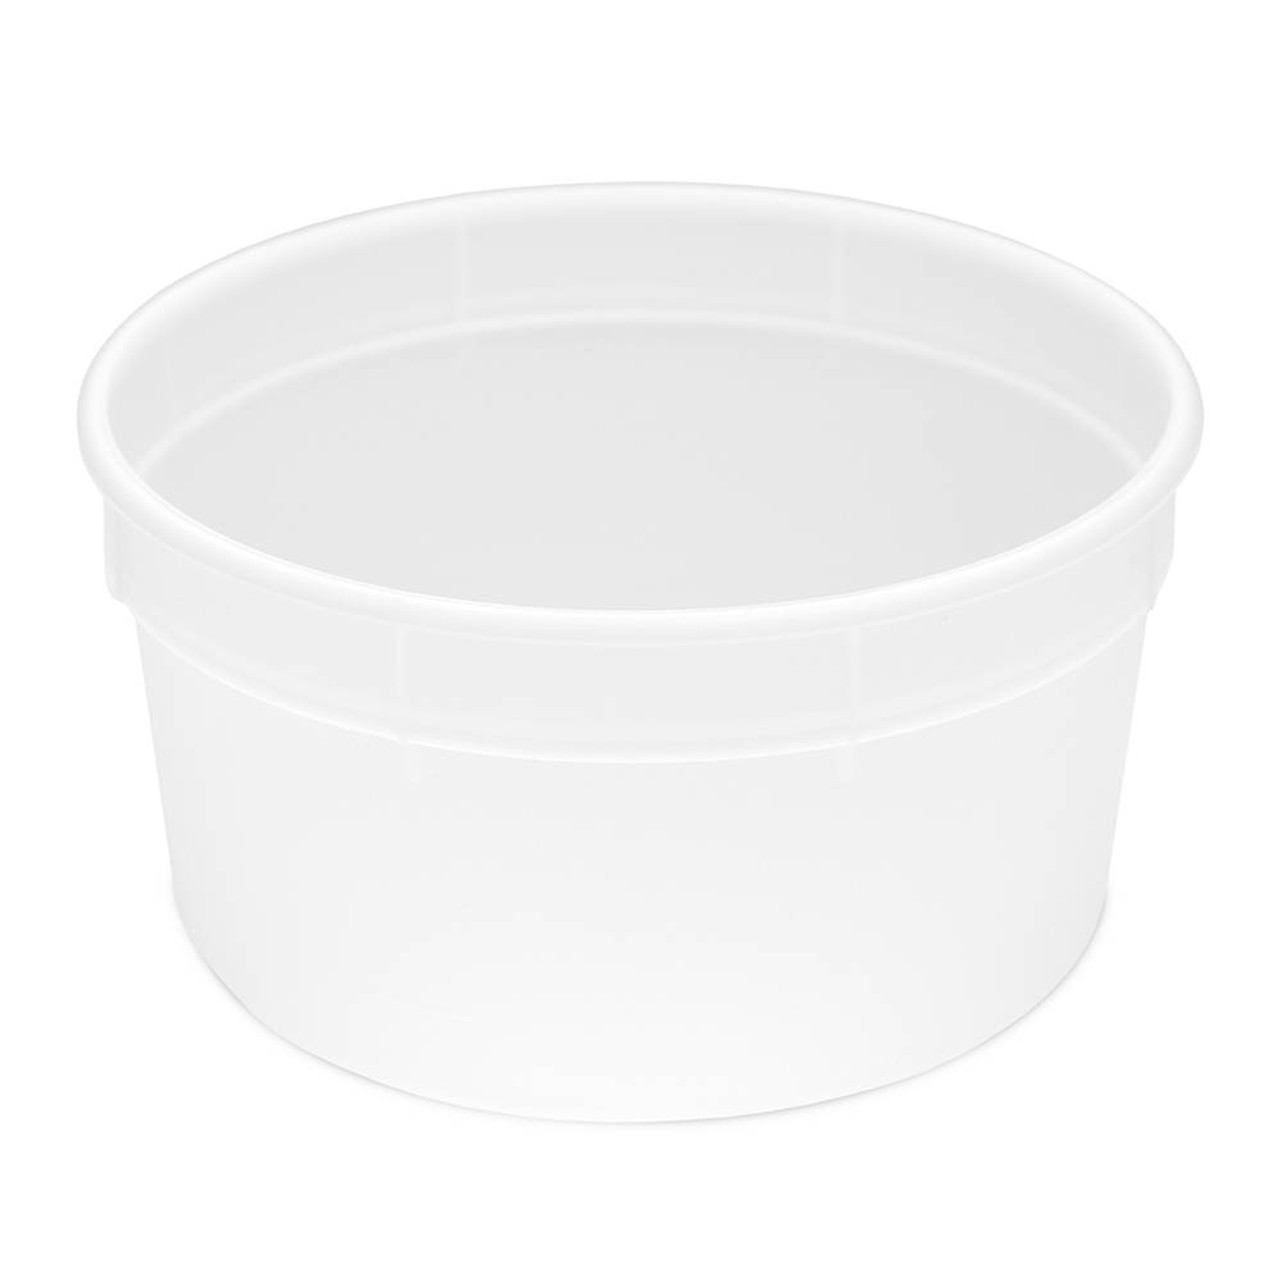 ePackageSupply 1/4 Gallon (32 oz) 1 Quart Food Storage Containers with Lids  -Freezer and Microwave Safe Storage Containers, Round Plastic